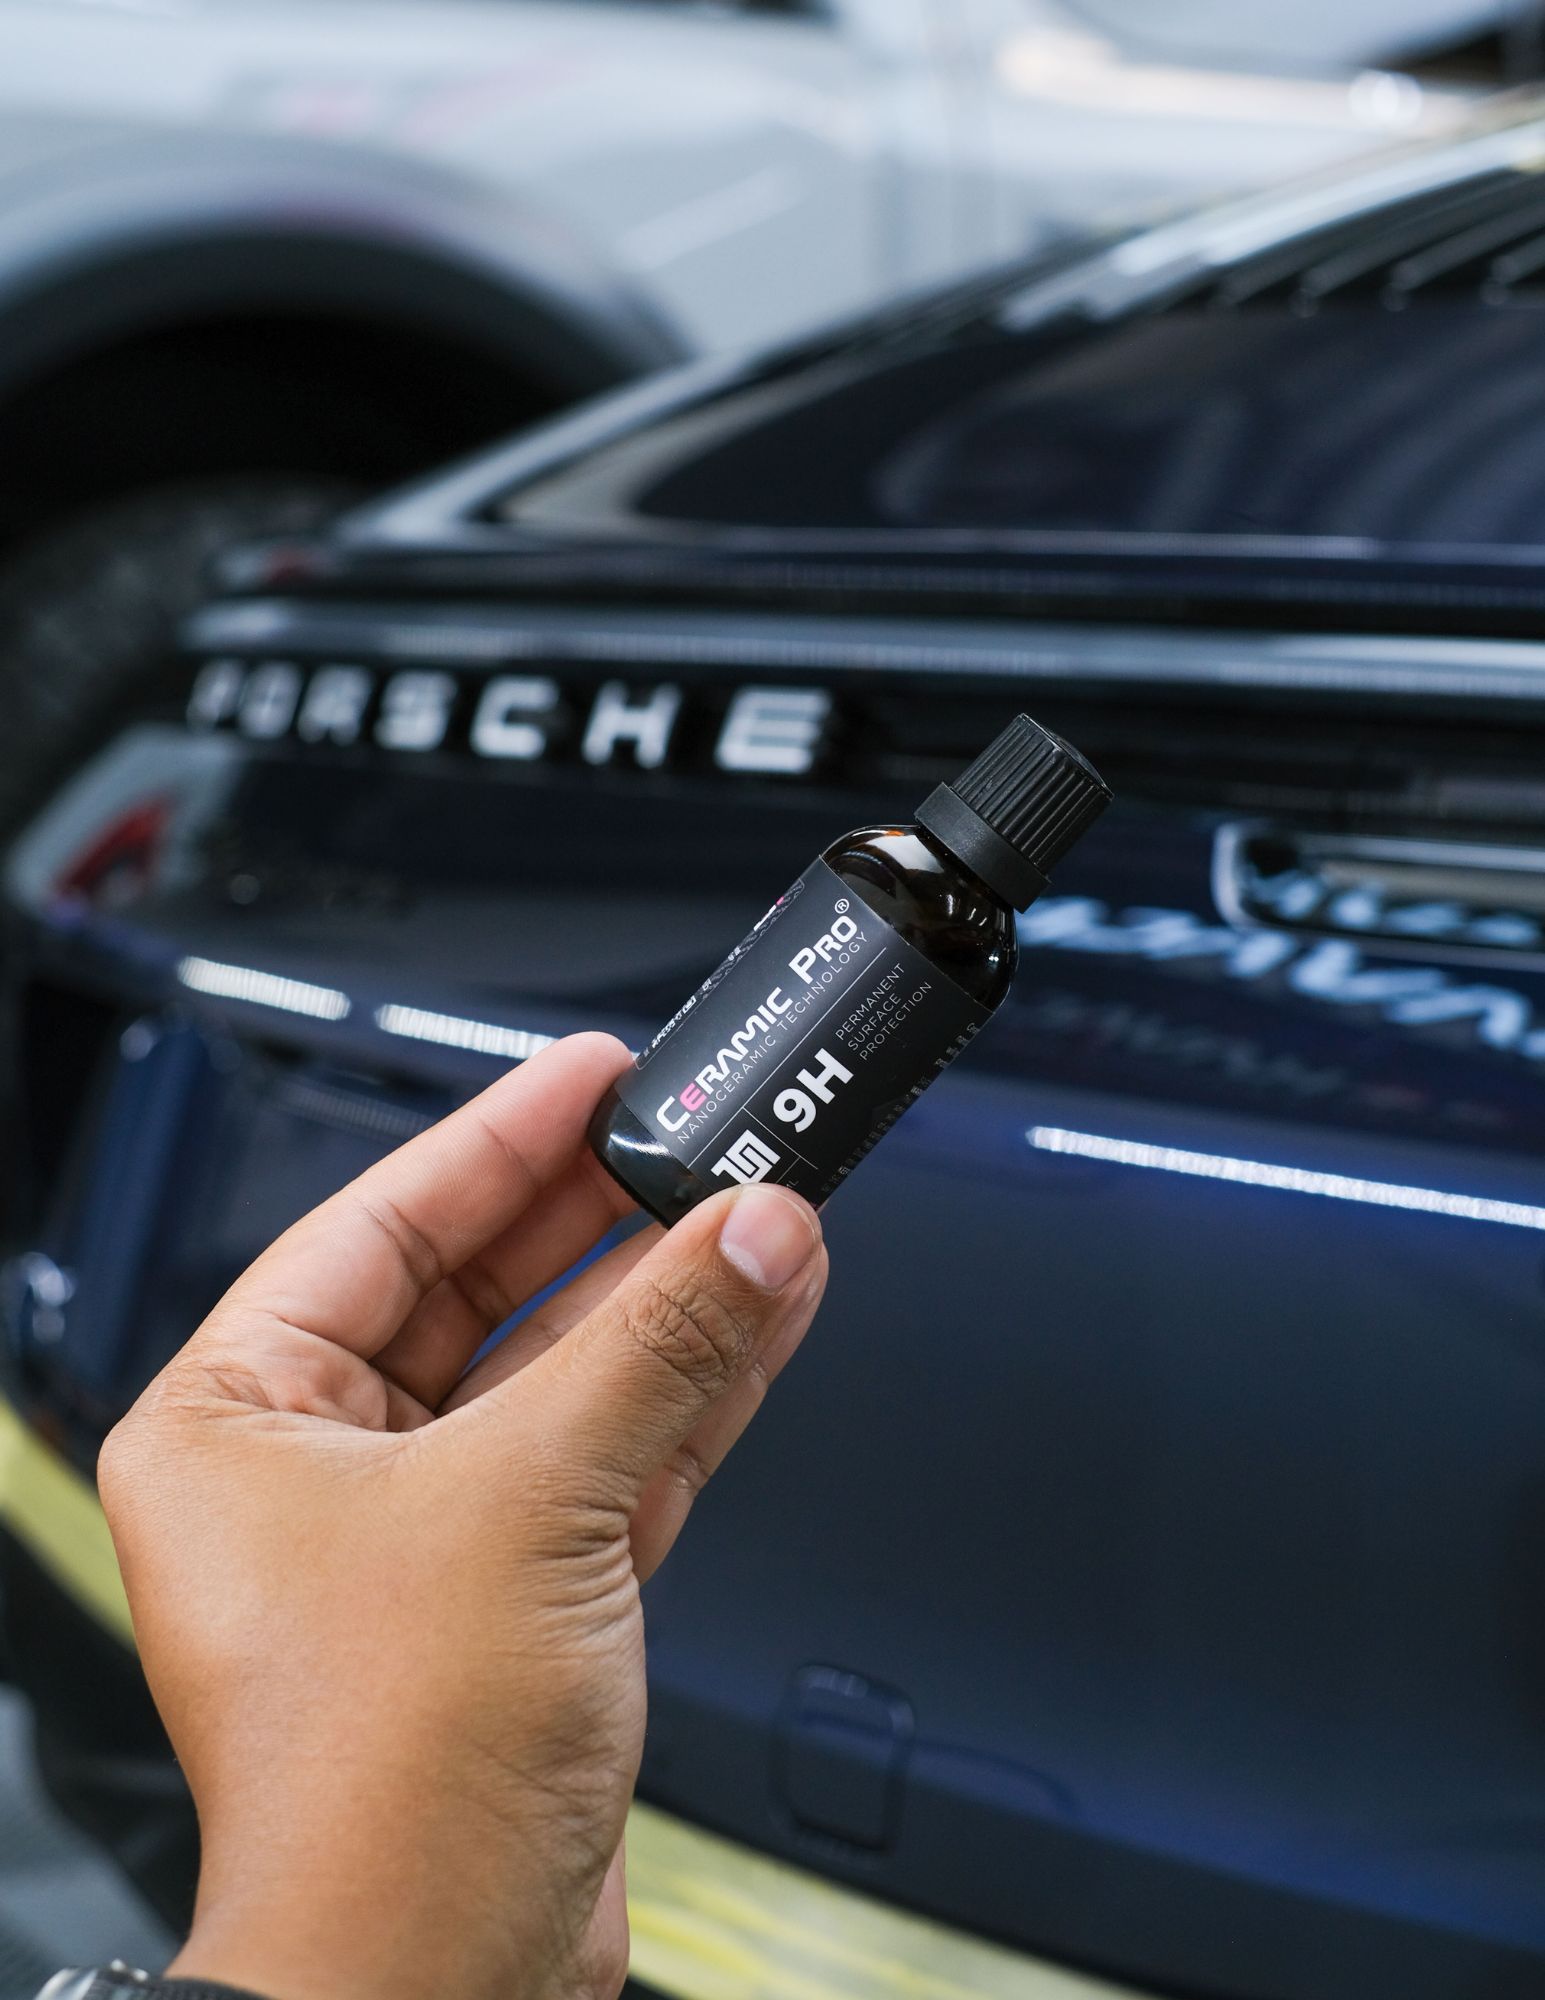 Is ceramic coating for cars a good investment?